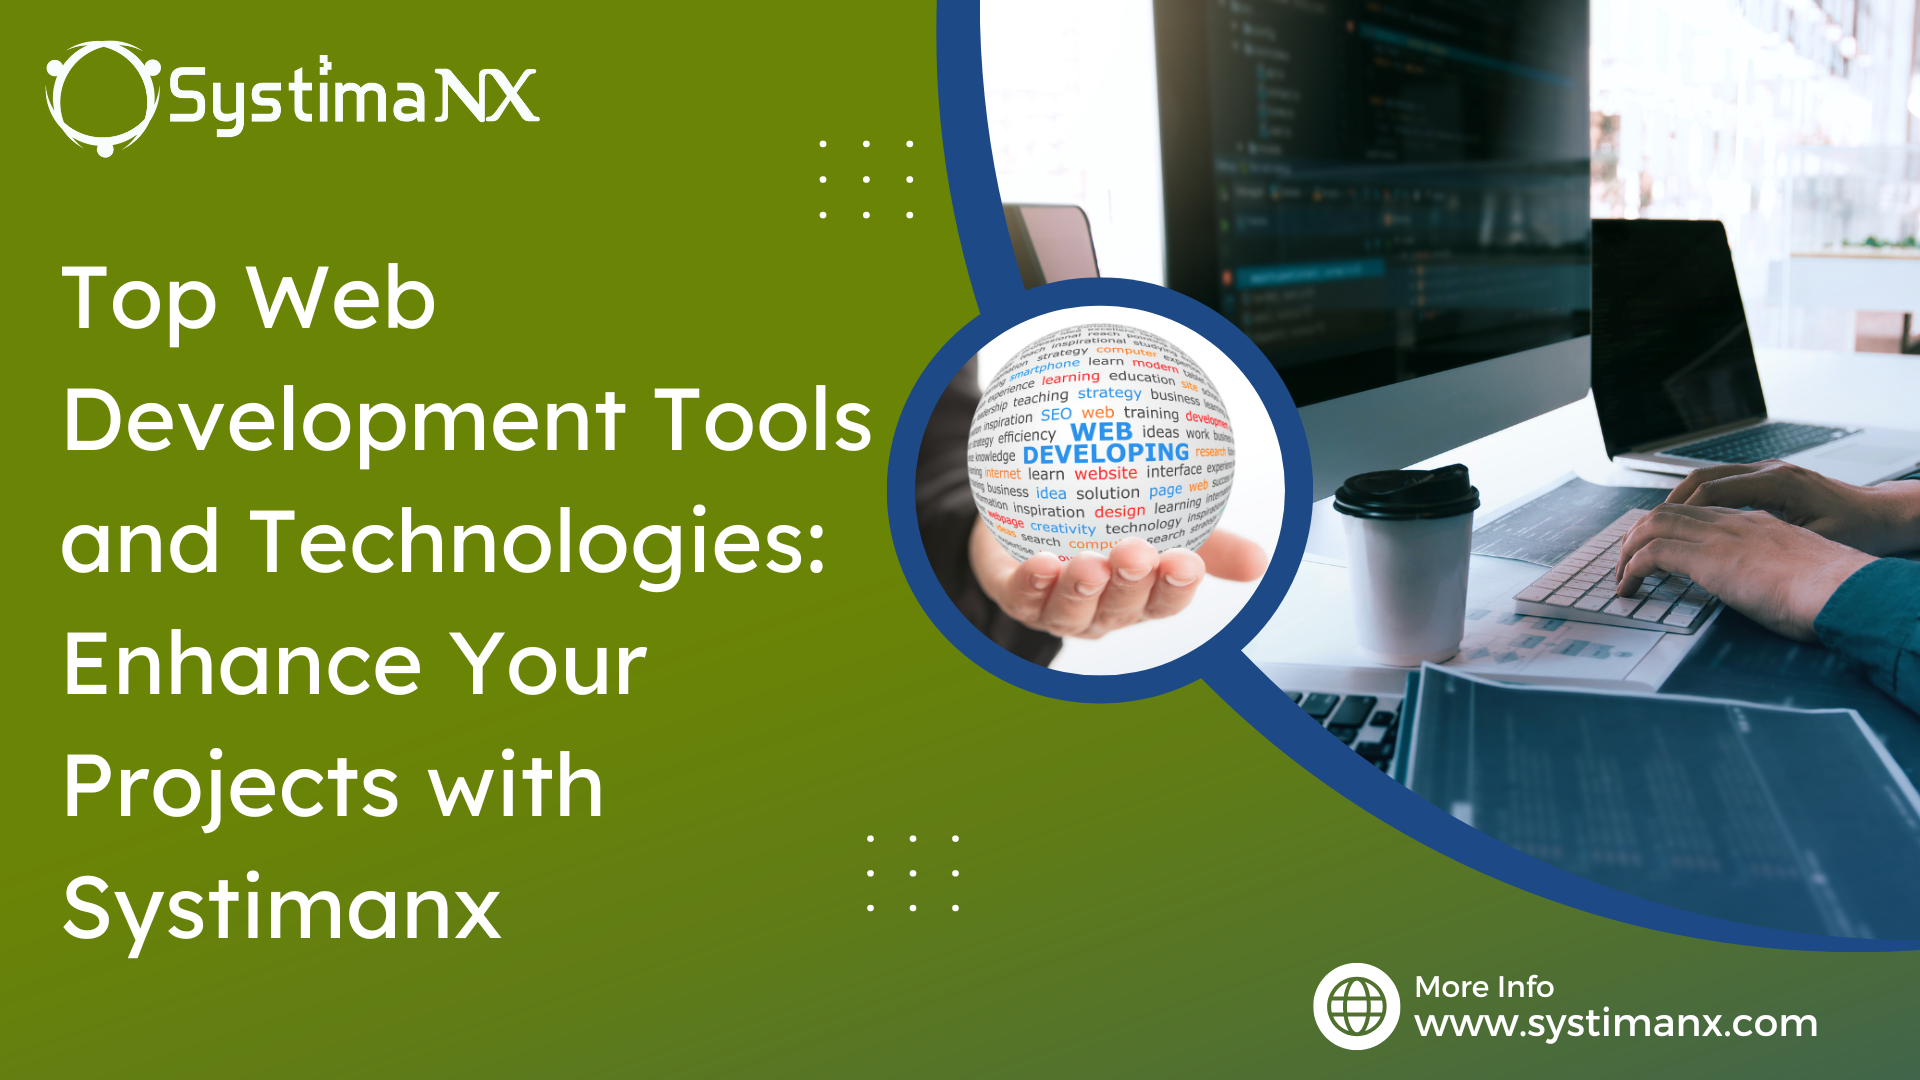 Top Web Development Tools and Technologies: Enhance Your Projects with SystimaNX